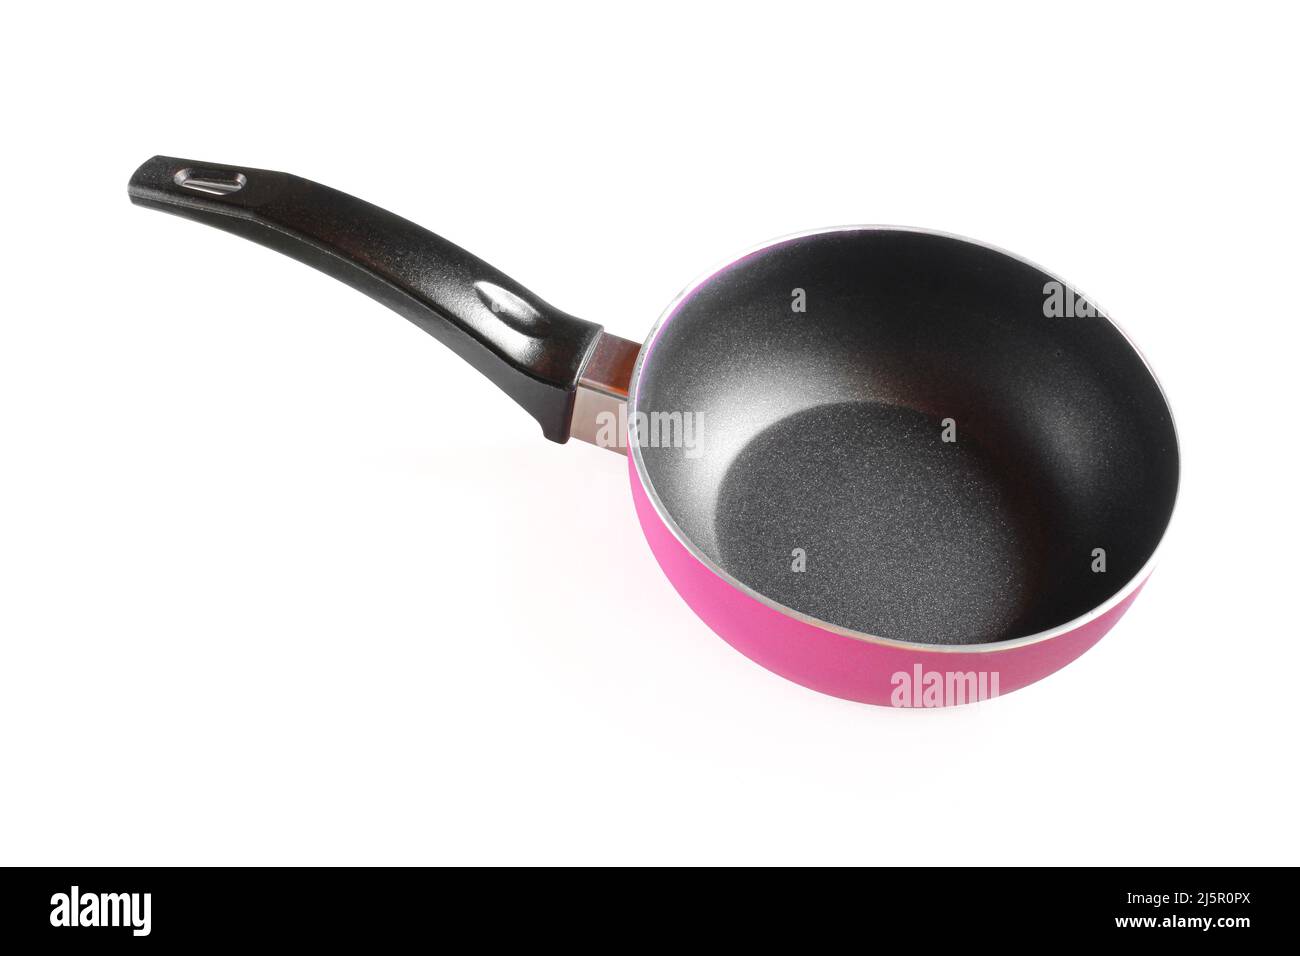 Small pink saucepan with black handle isolated on white background. Empty kitchen utensil Stock Photo